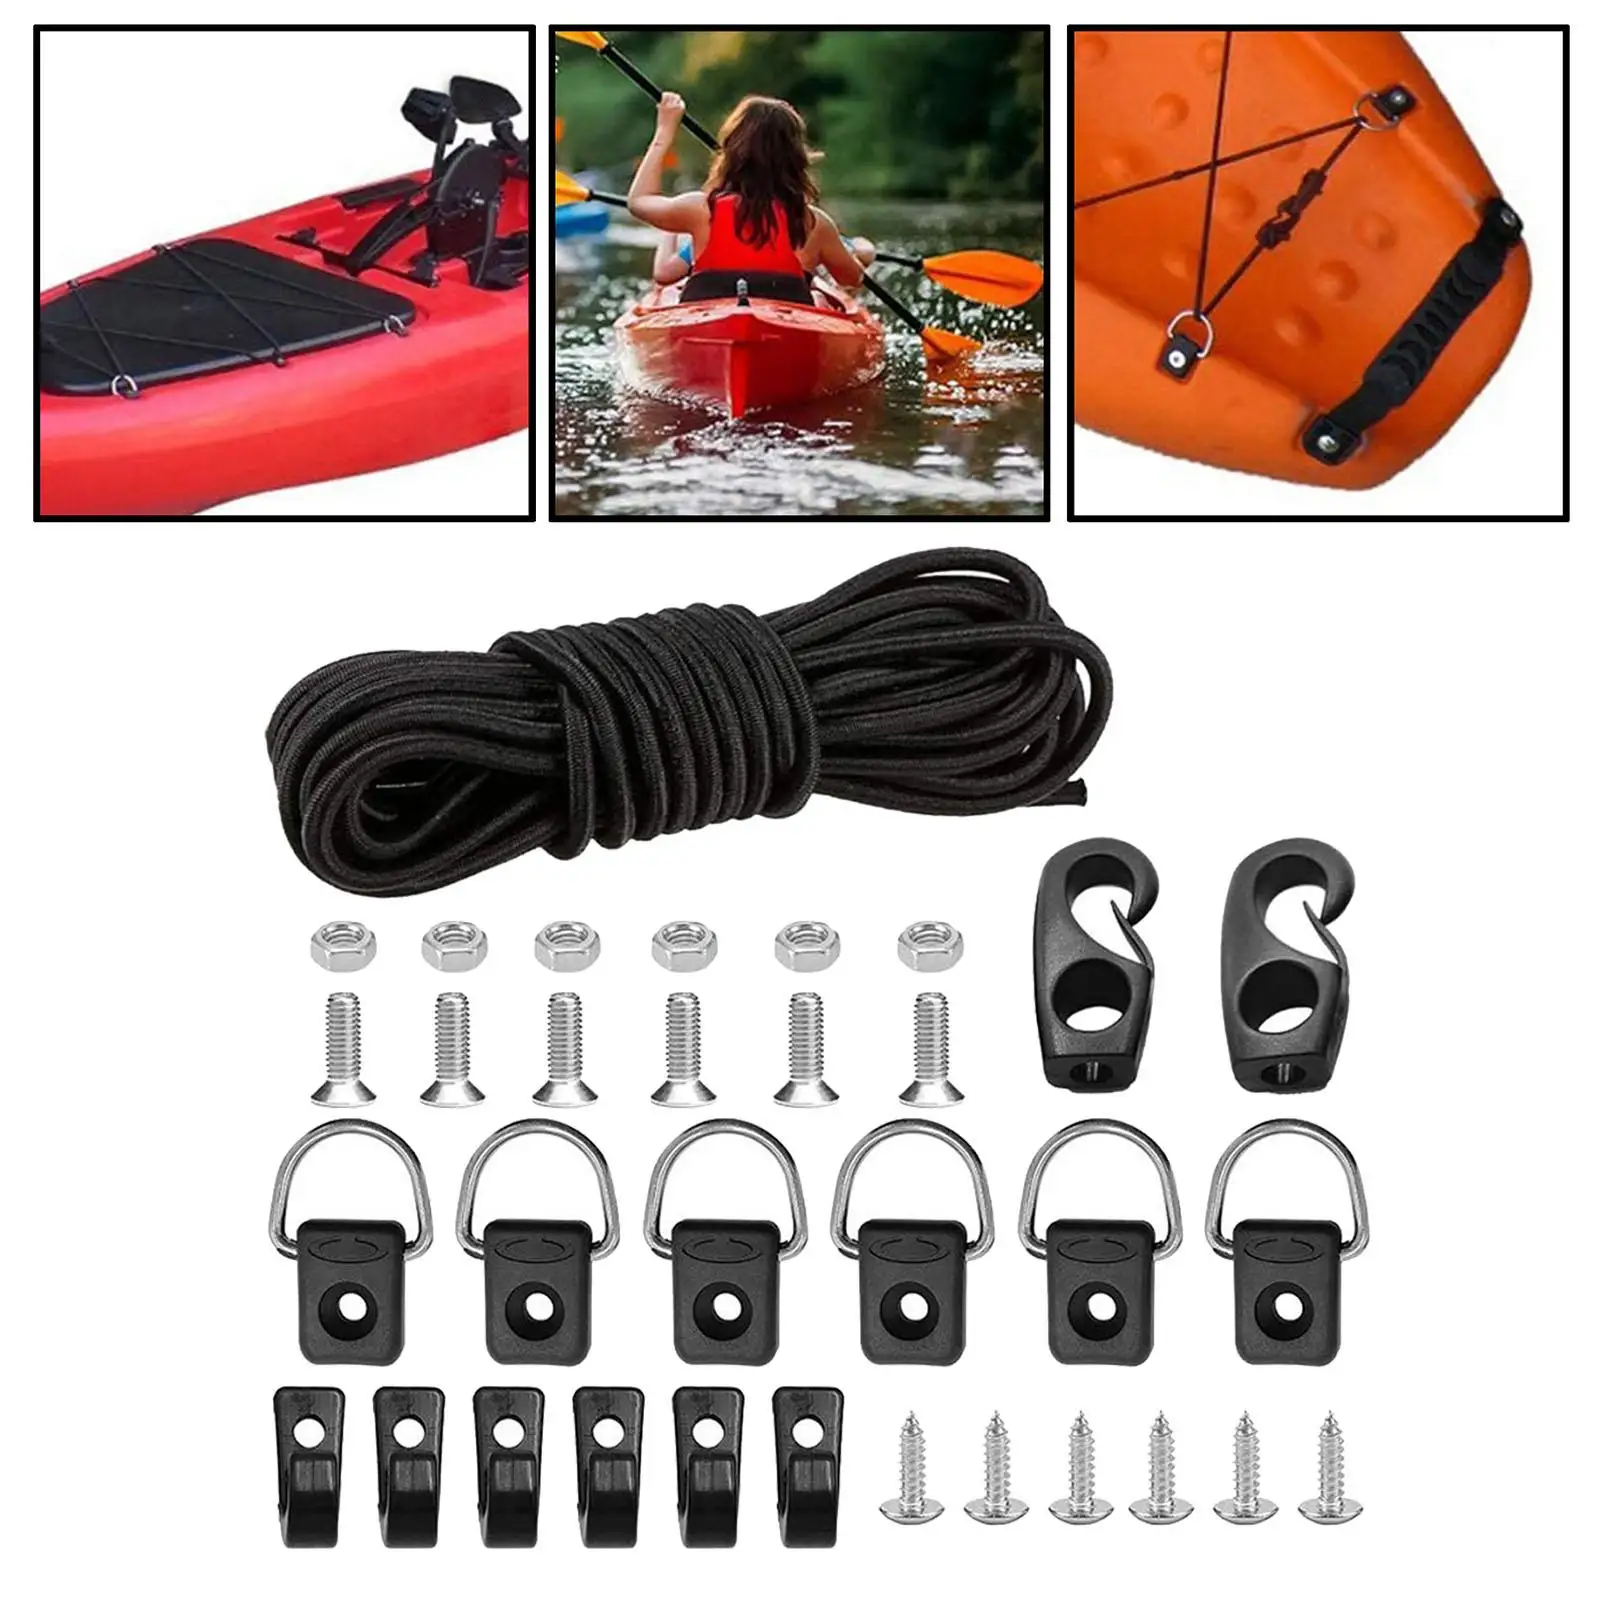 10X Canoe kayak D ring outfitting fishing rigging bungee kit accessory Deck F yd 